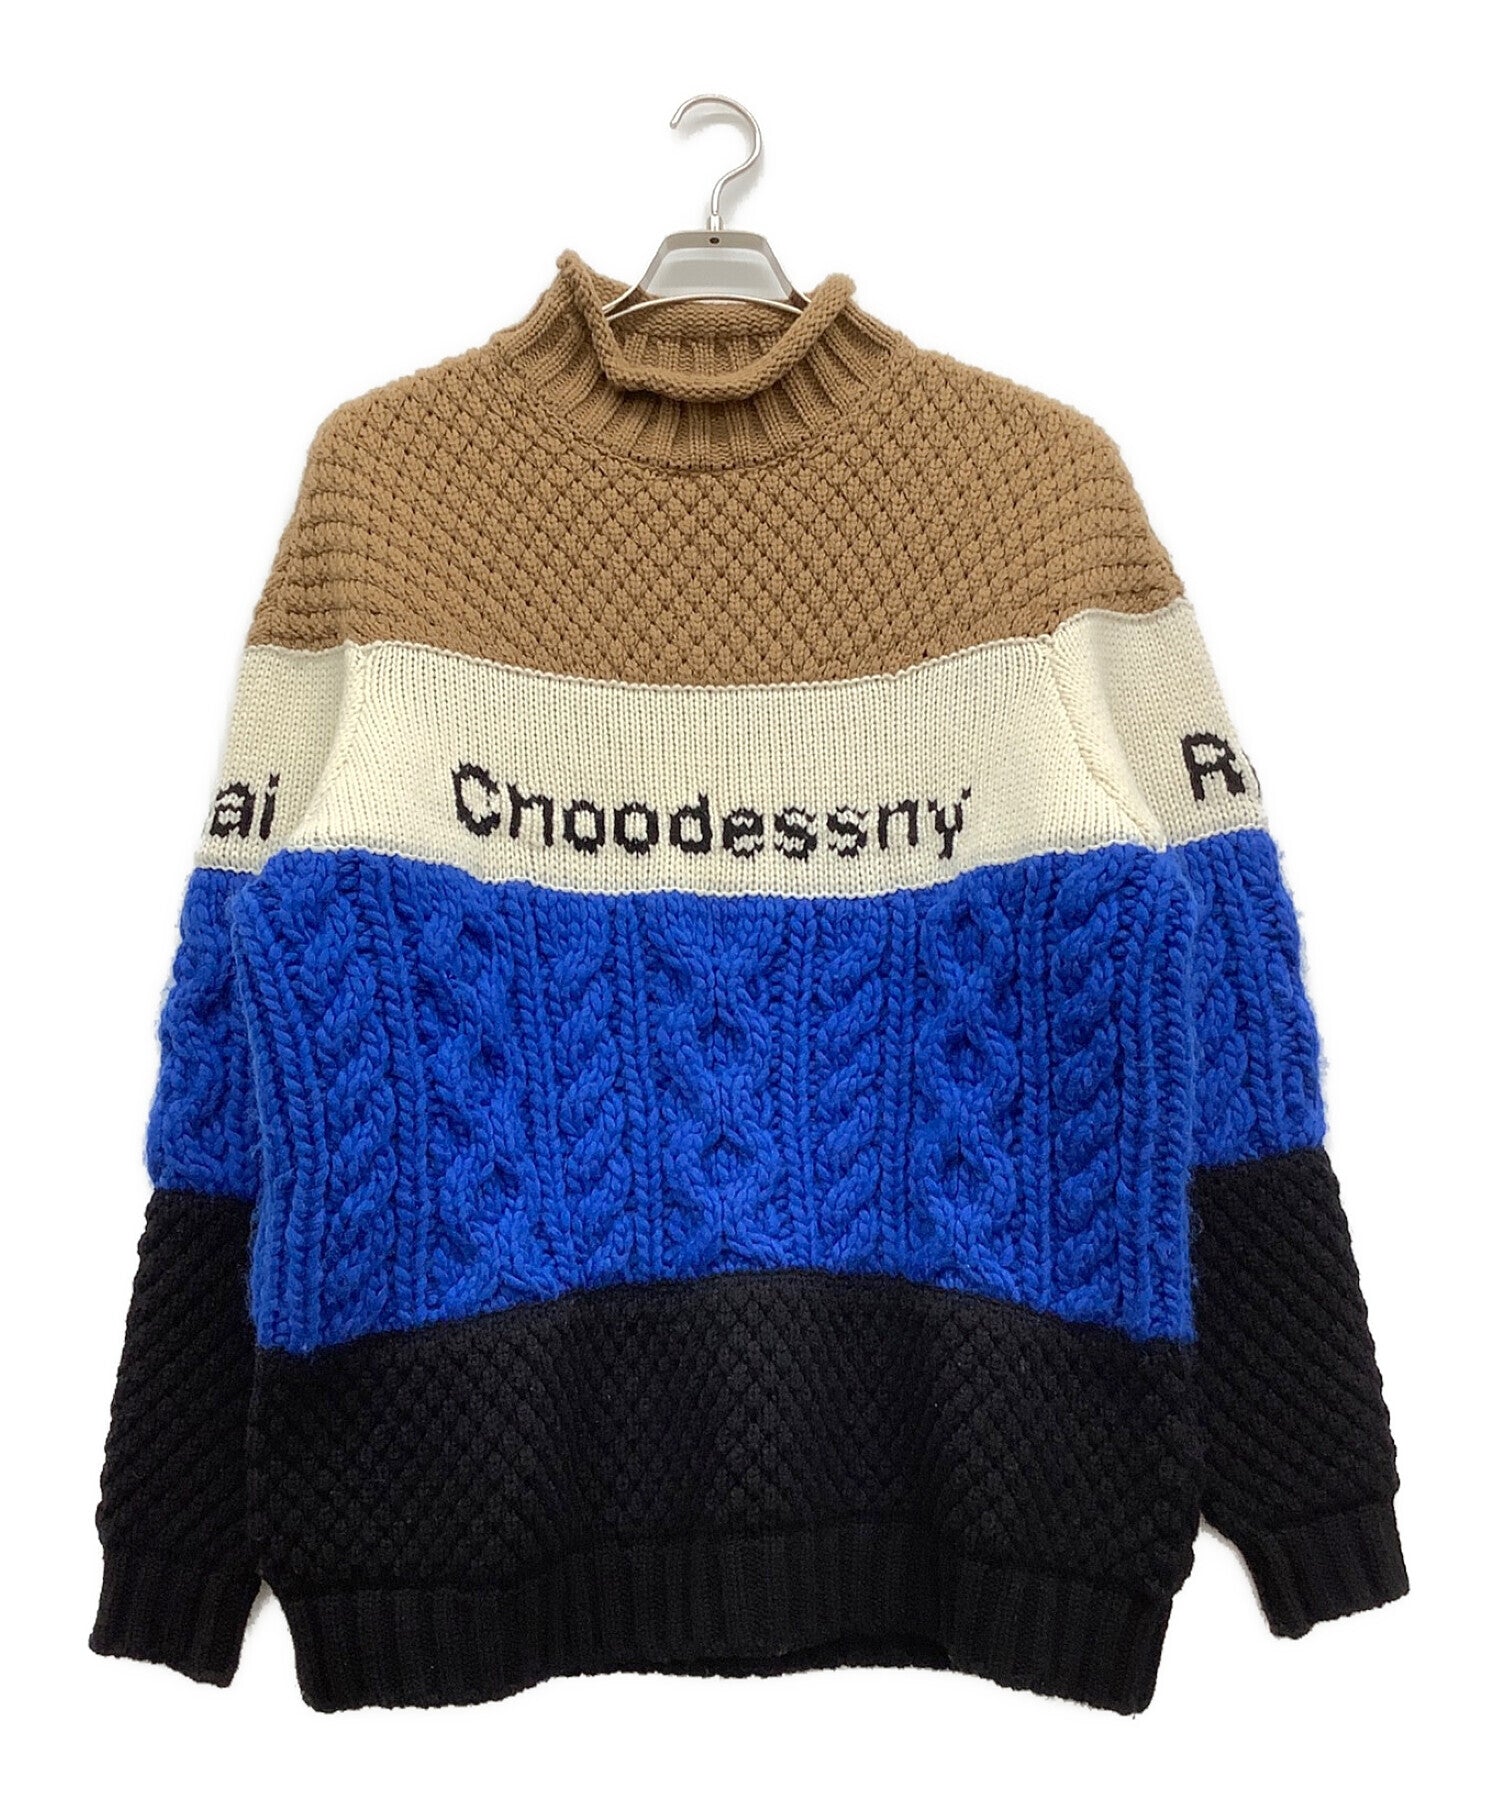 UNDERCOVER Knit high neck knit in different colors UCX4905